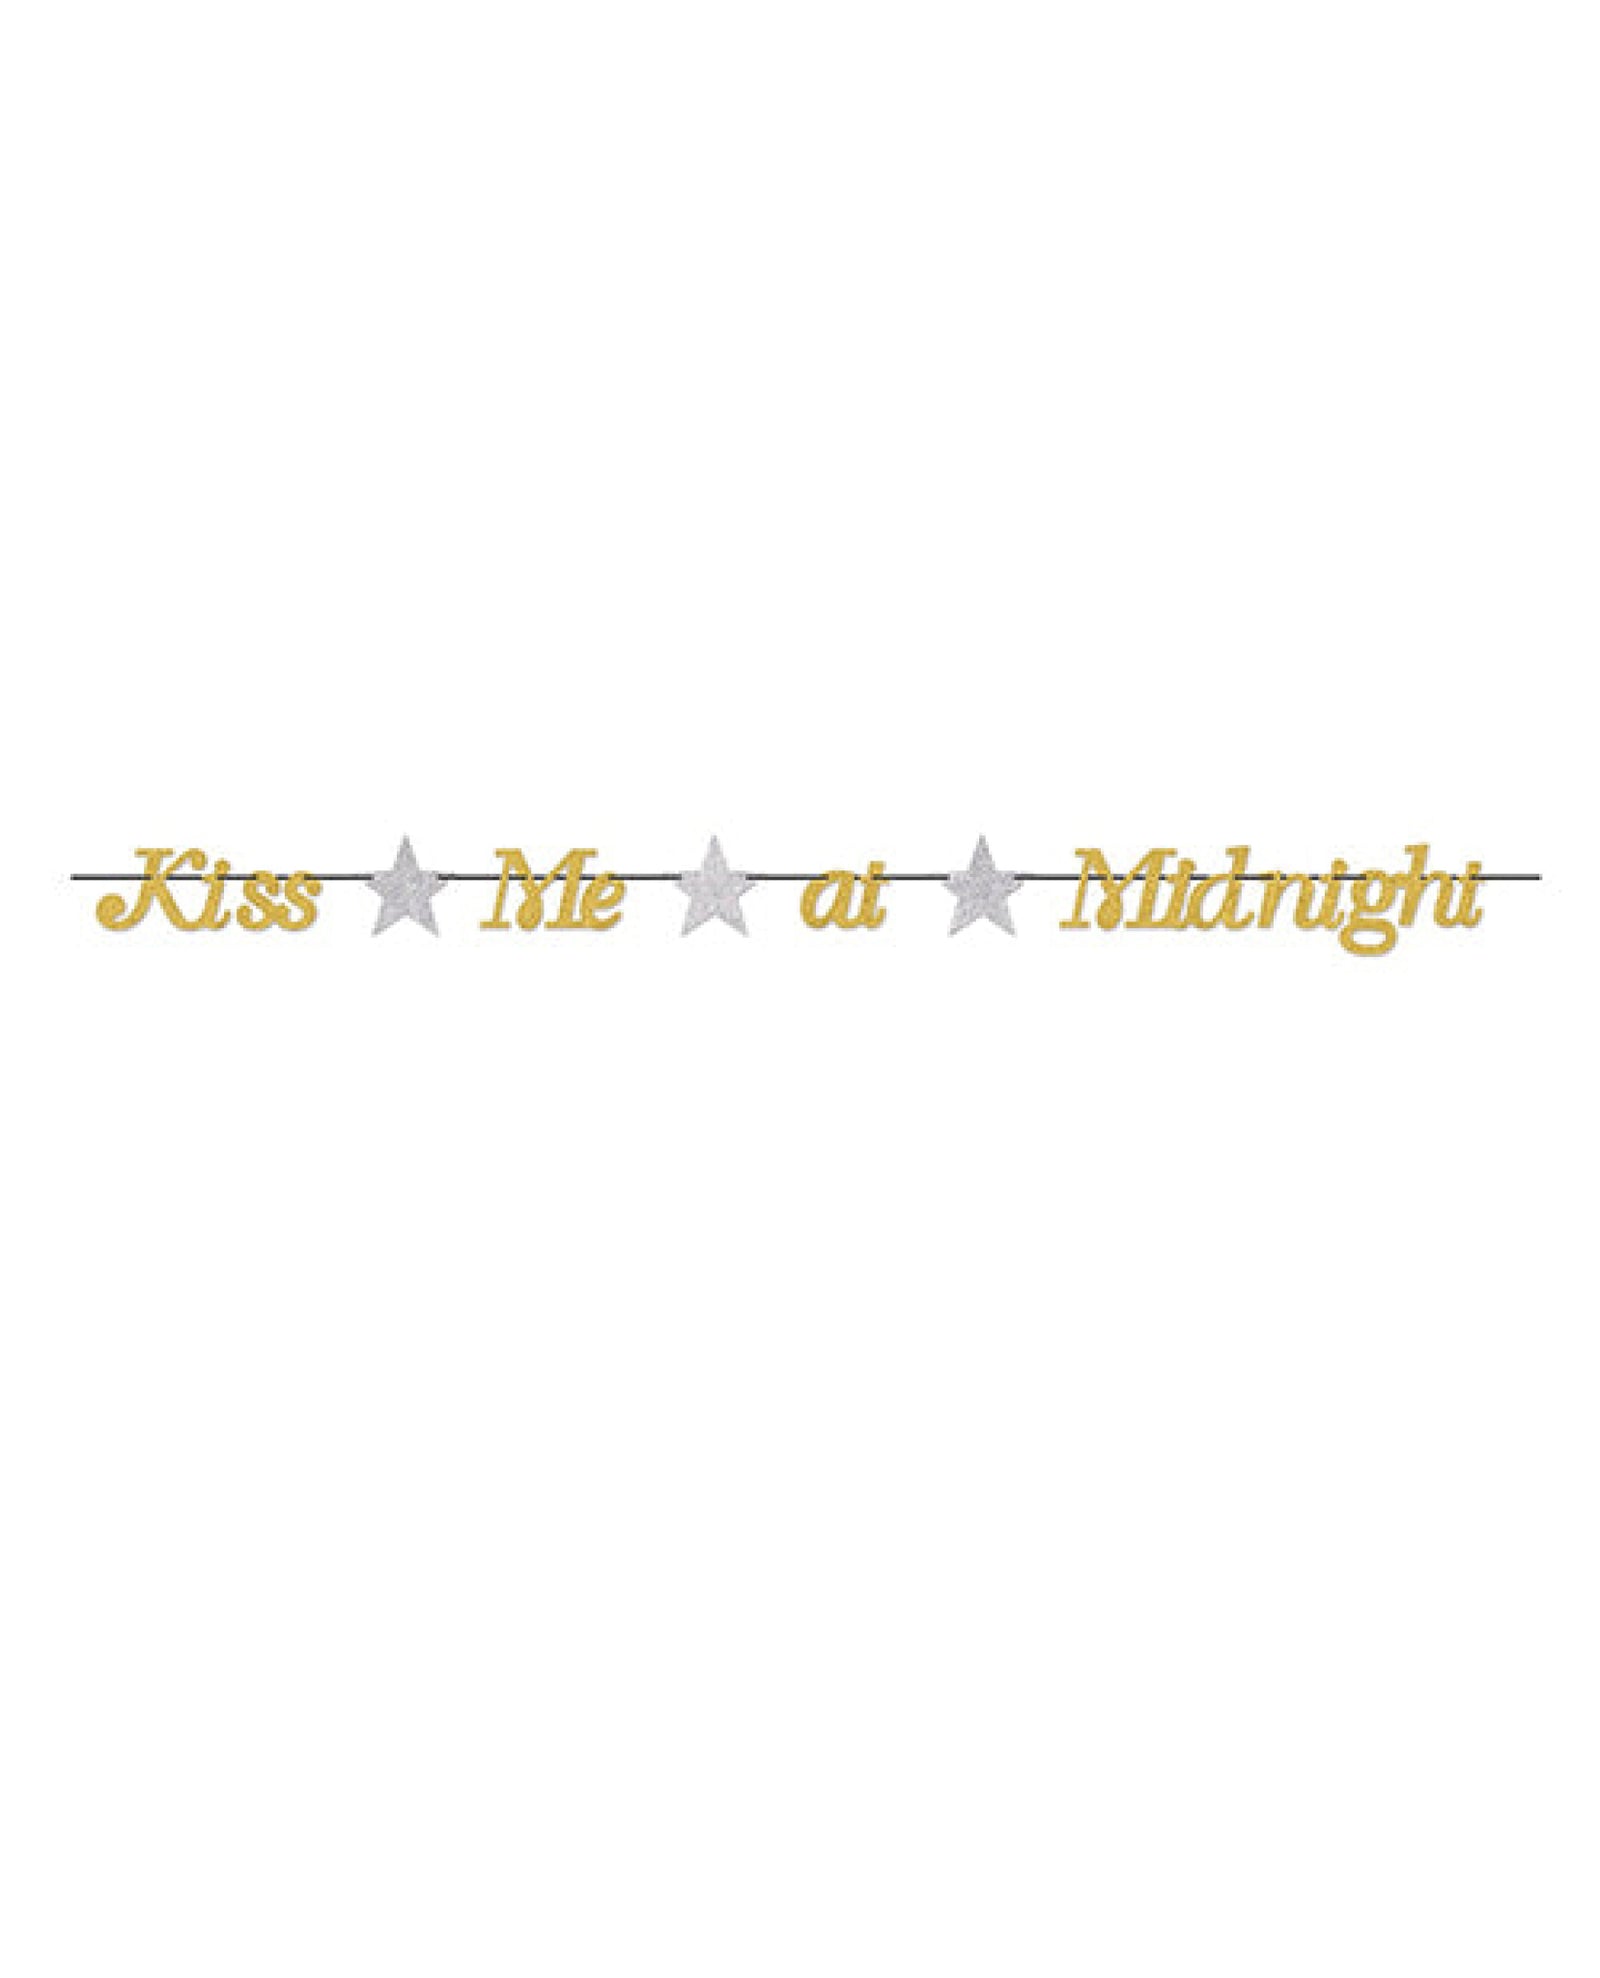 New Year's Kiss Me At Midnight Streamer - Gold-silver Beistle